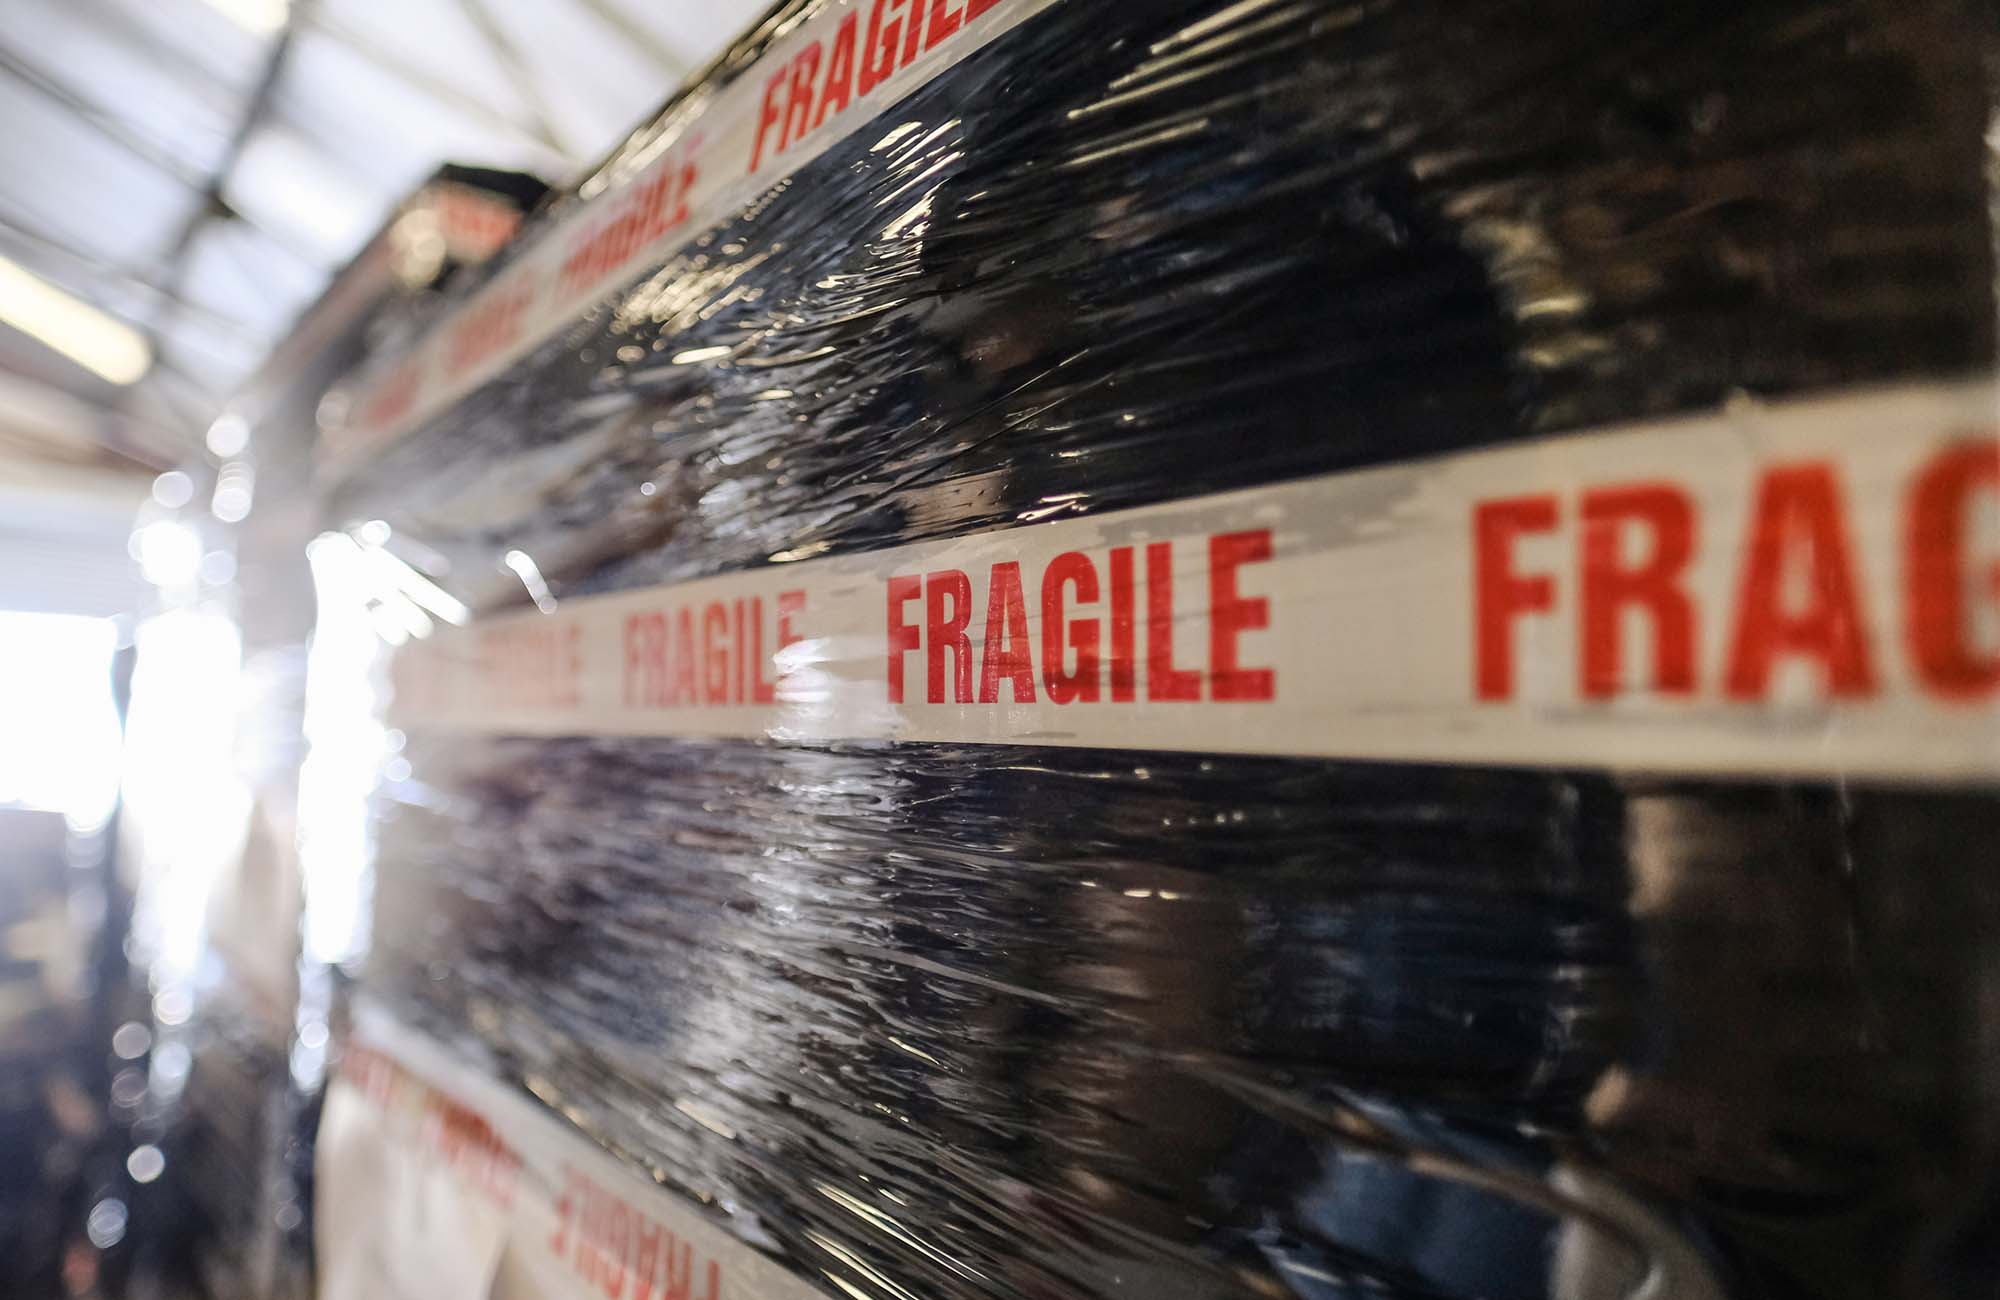 Shallow focus of a Fragile letter seen on generic packaging tape, seen stuck to a large delivery about to be shipped from a warehouse.